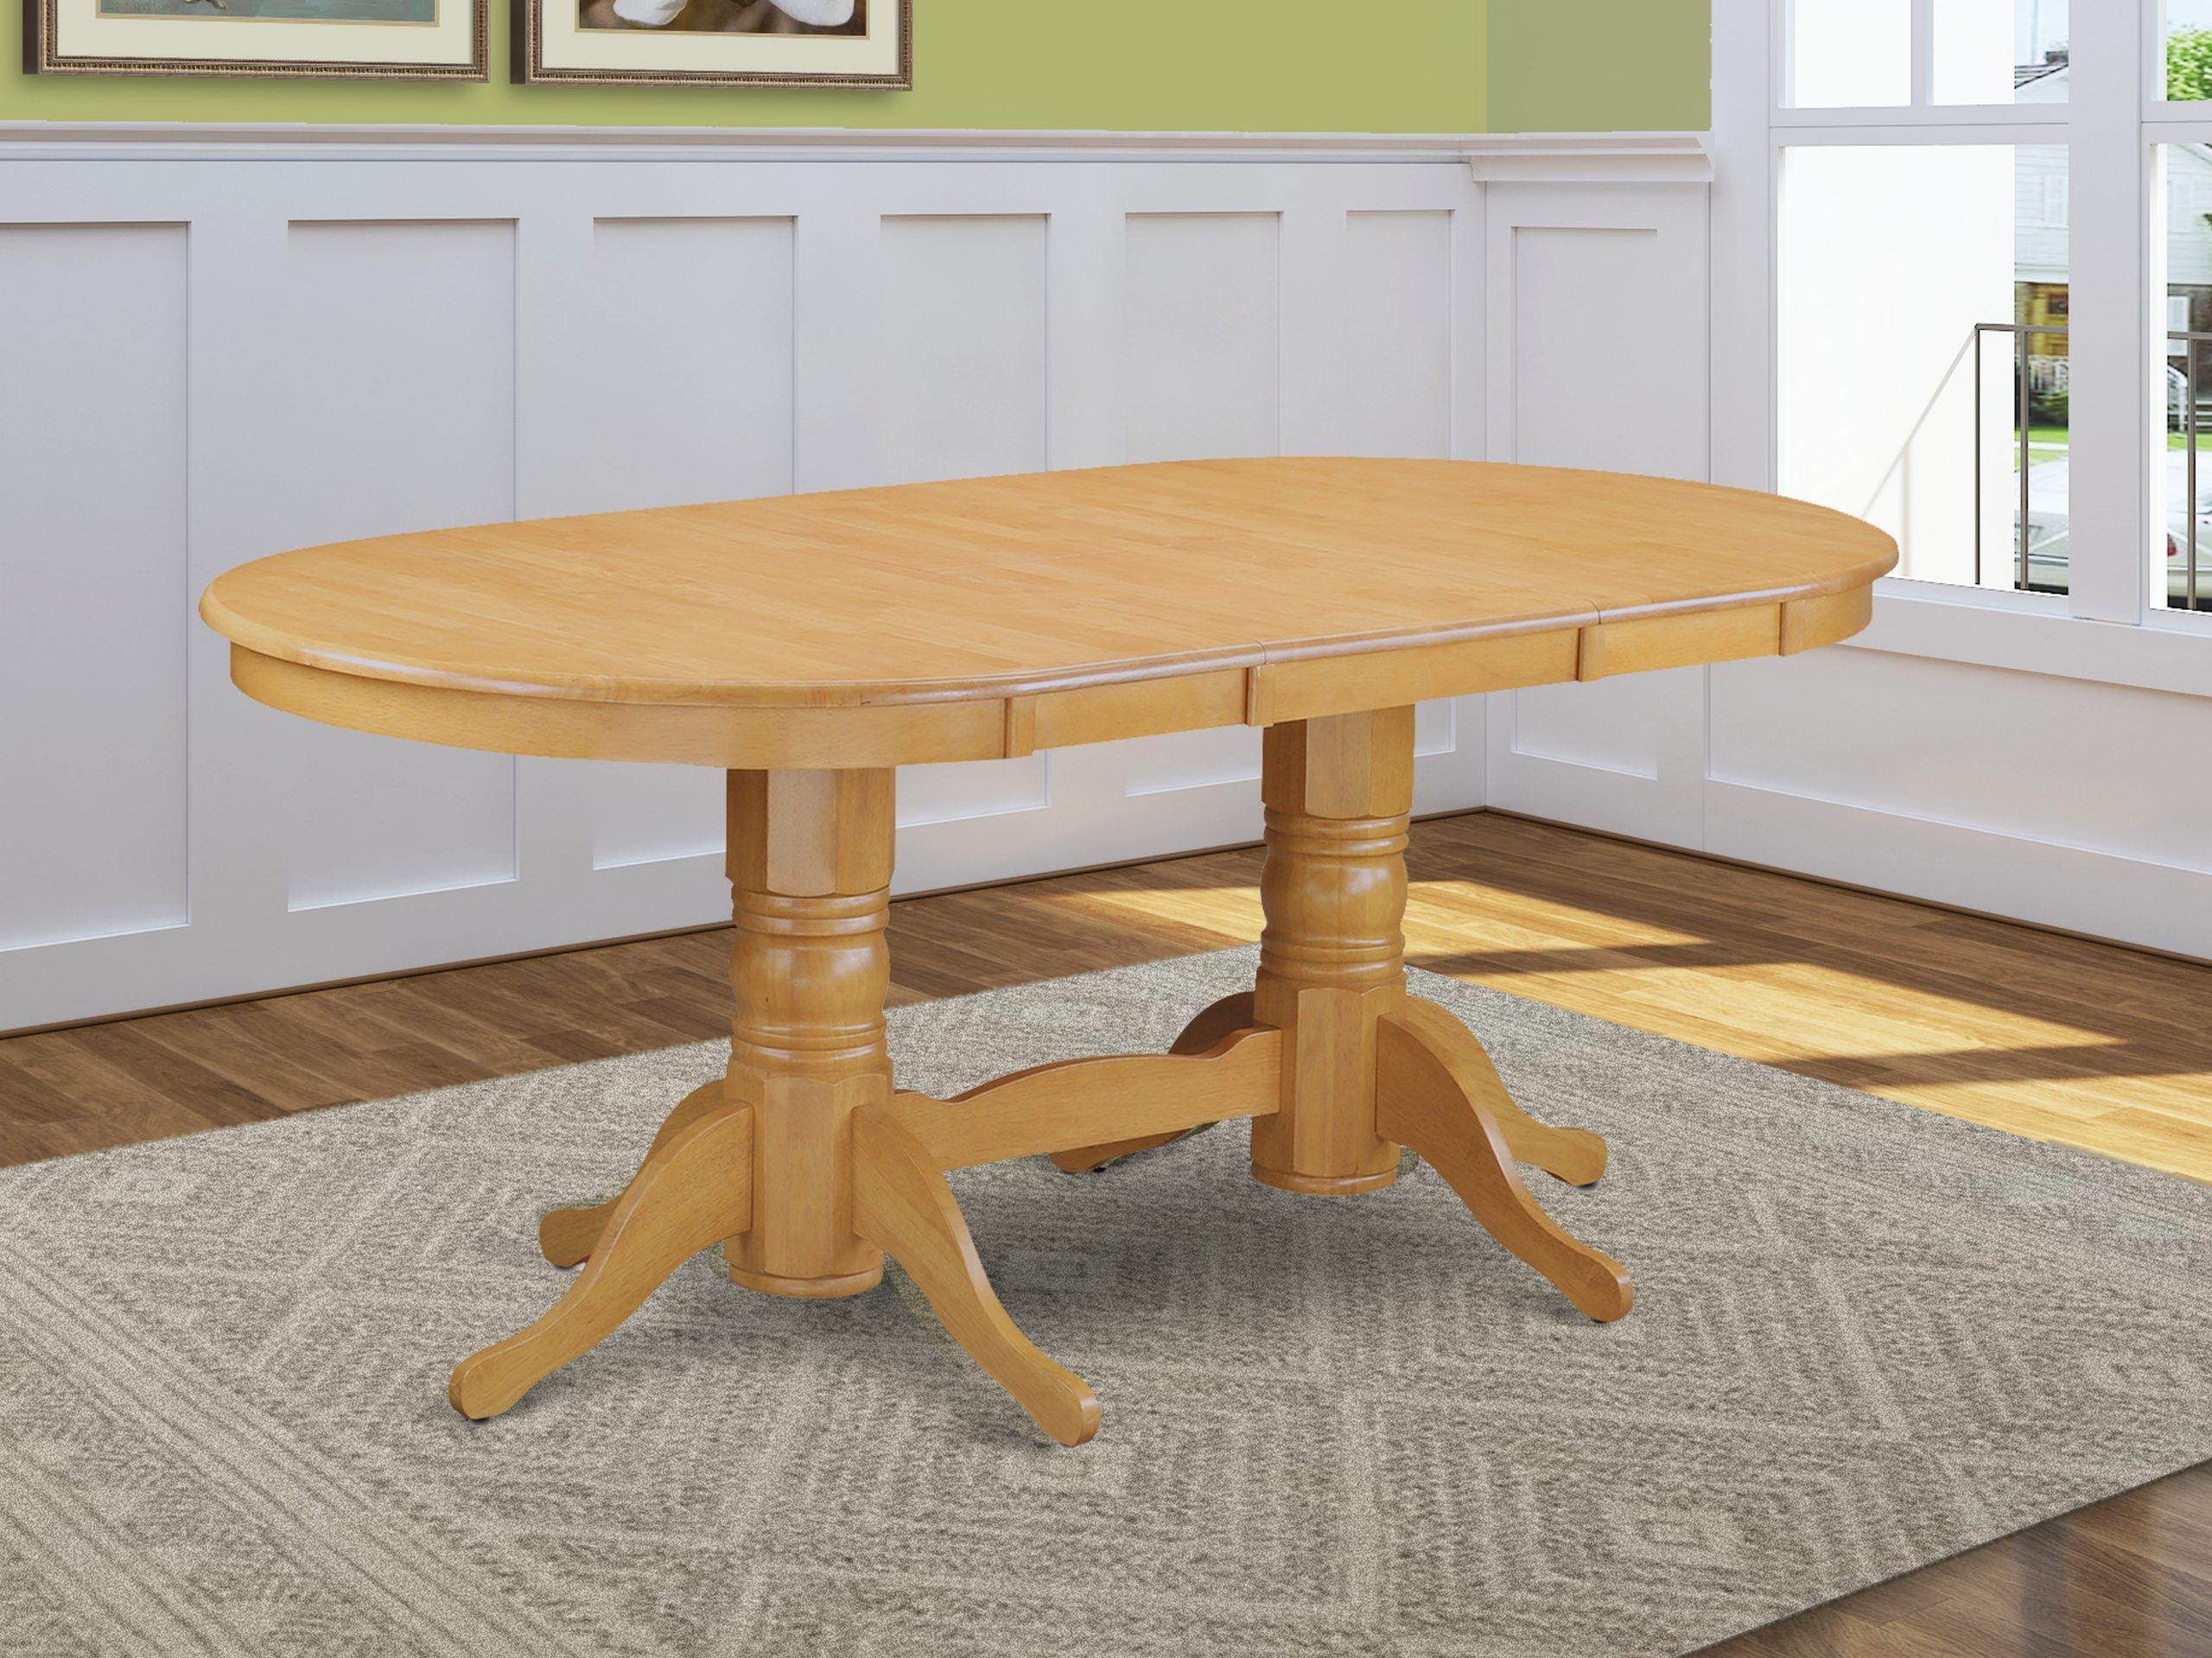 Vat Oak Tp Rectangular Round Corner Dining Table With 17 Pertaining To Leaf Round Console Tables (View 10 of 20)